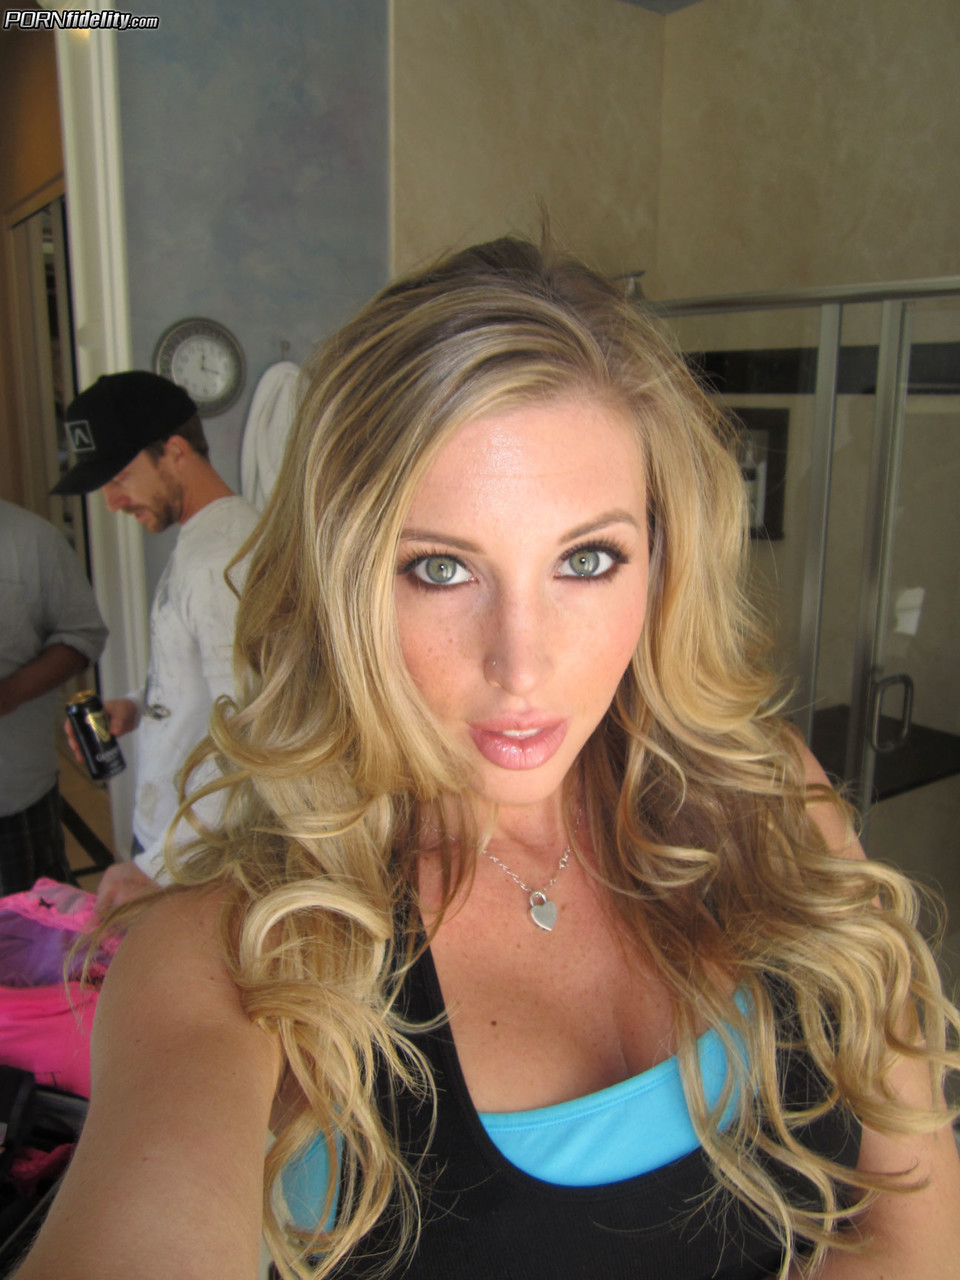 Sexy blonde chick Samantha Saint poses in the nude after a long prep session foto porno #427437337 | Porn Fidelity Pics, Ryan Madison, Samantha Saint, Groupsex, porno mobile